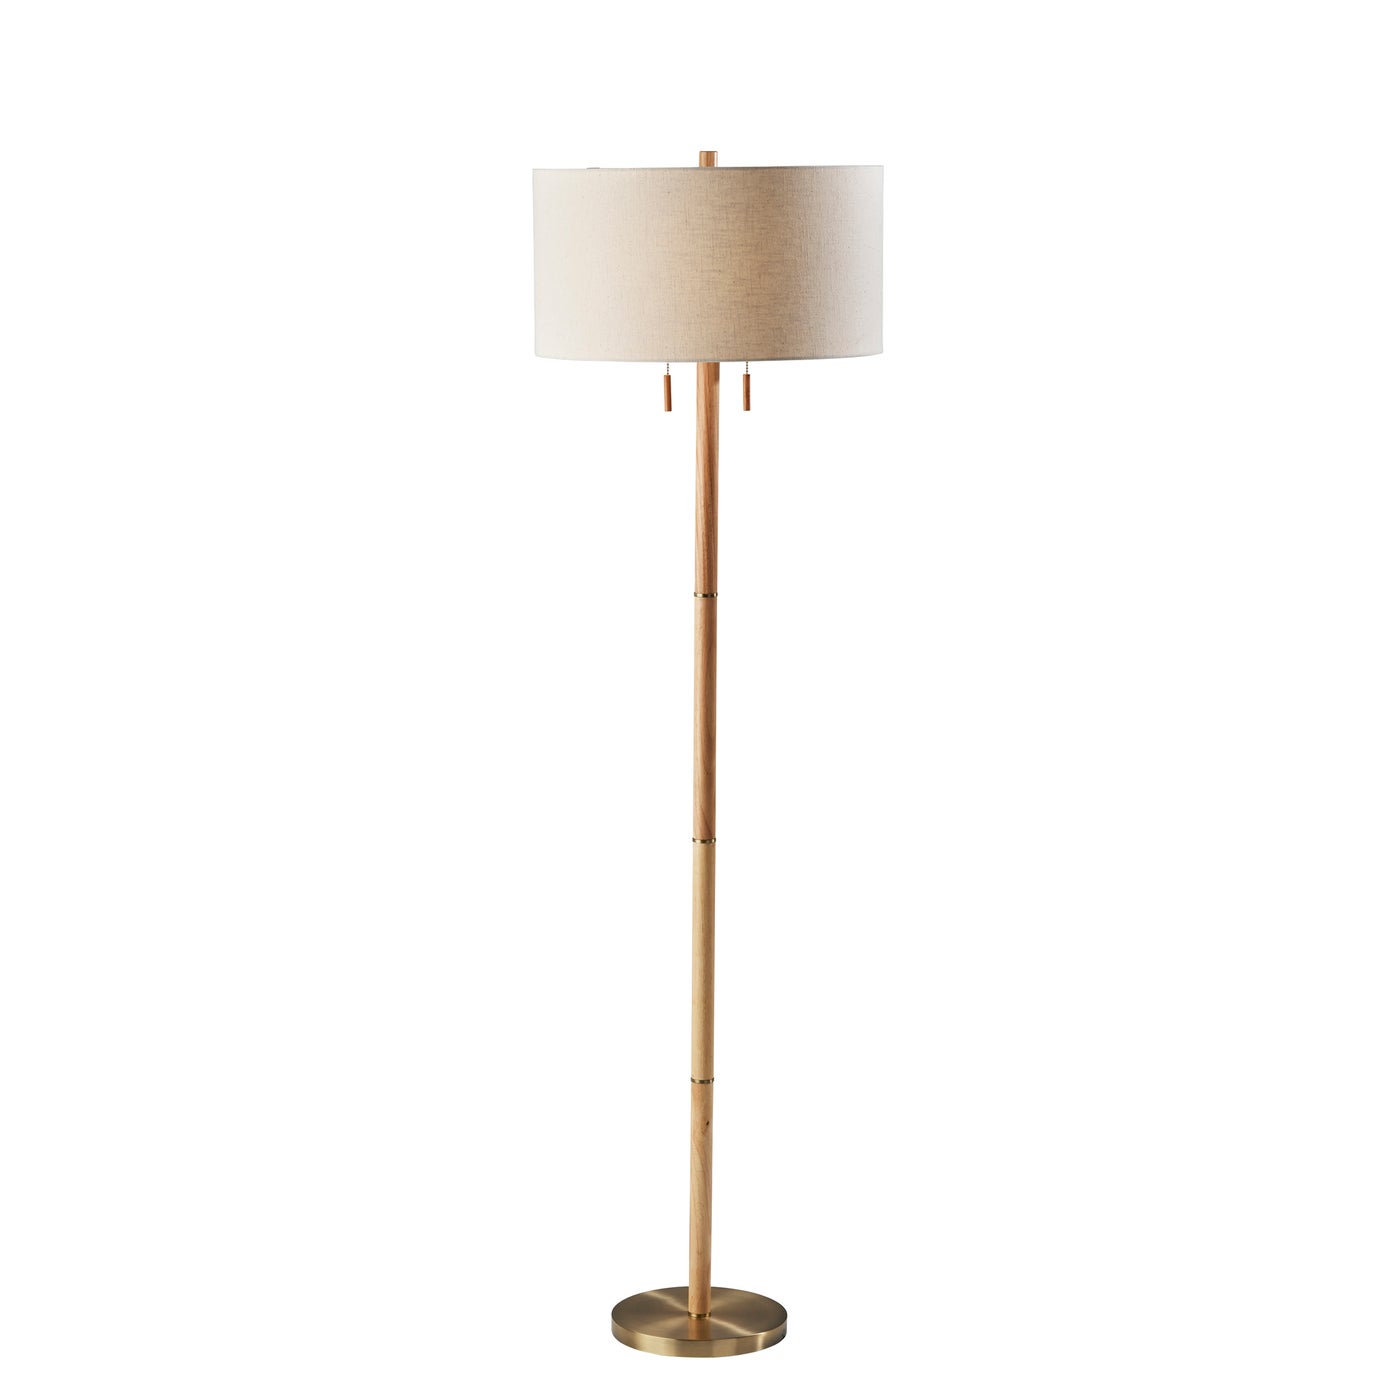 Adesso Home - 3375-12 - Two Light Floor Lamp - Madeline - Natural Rubberwood & Antique Brass